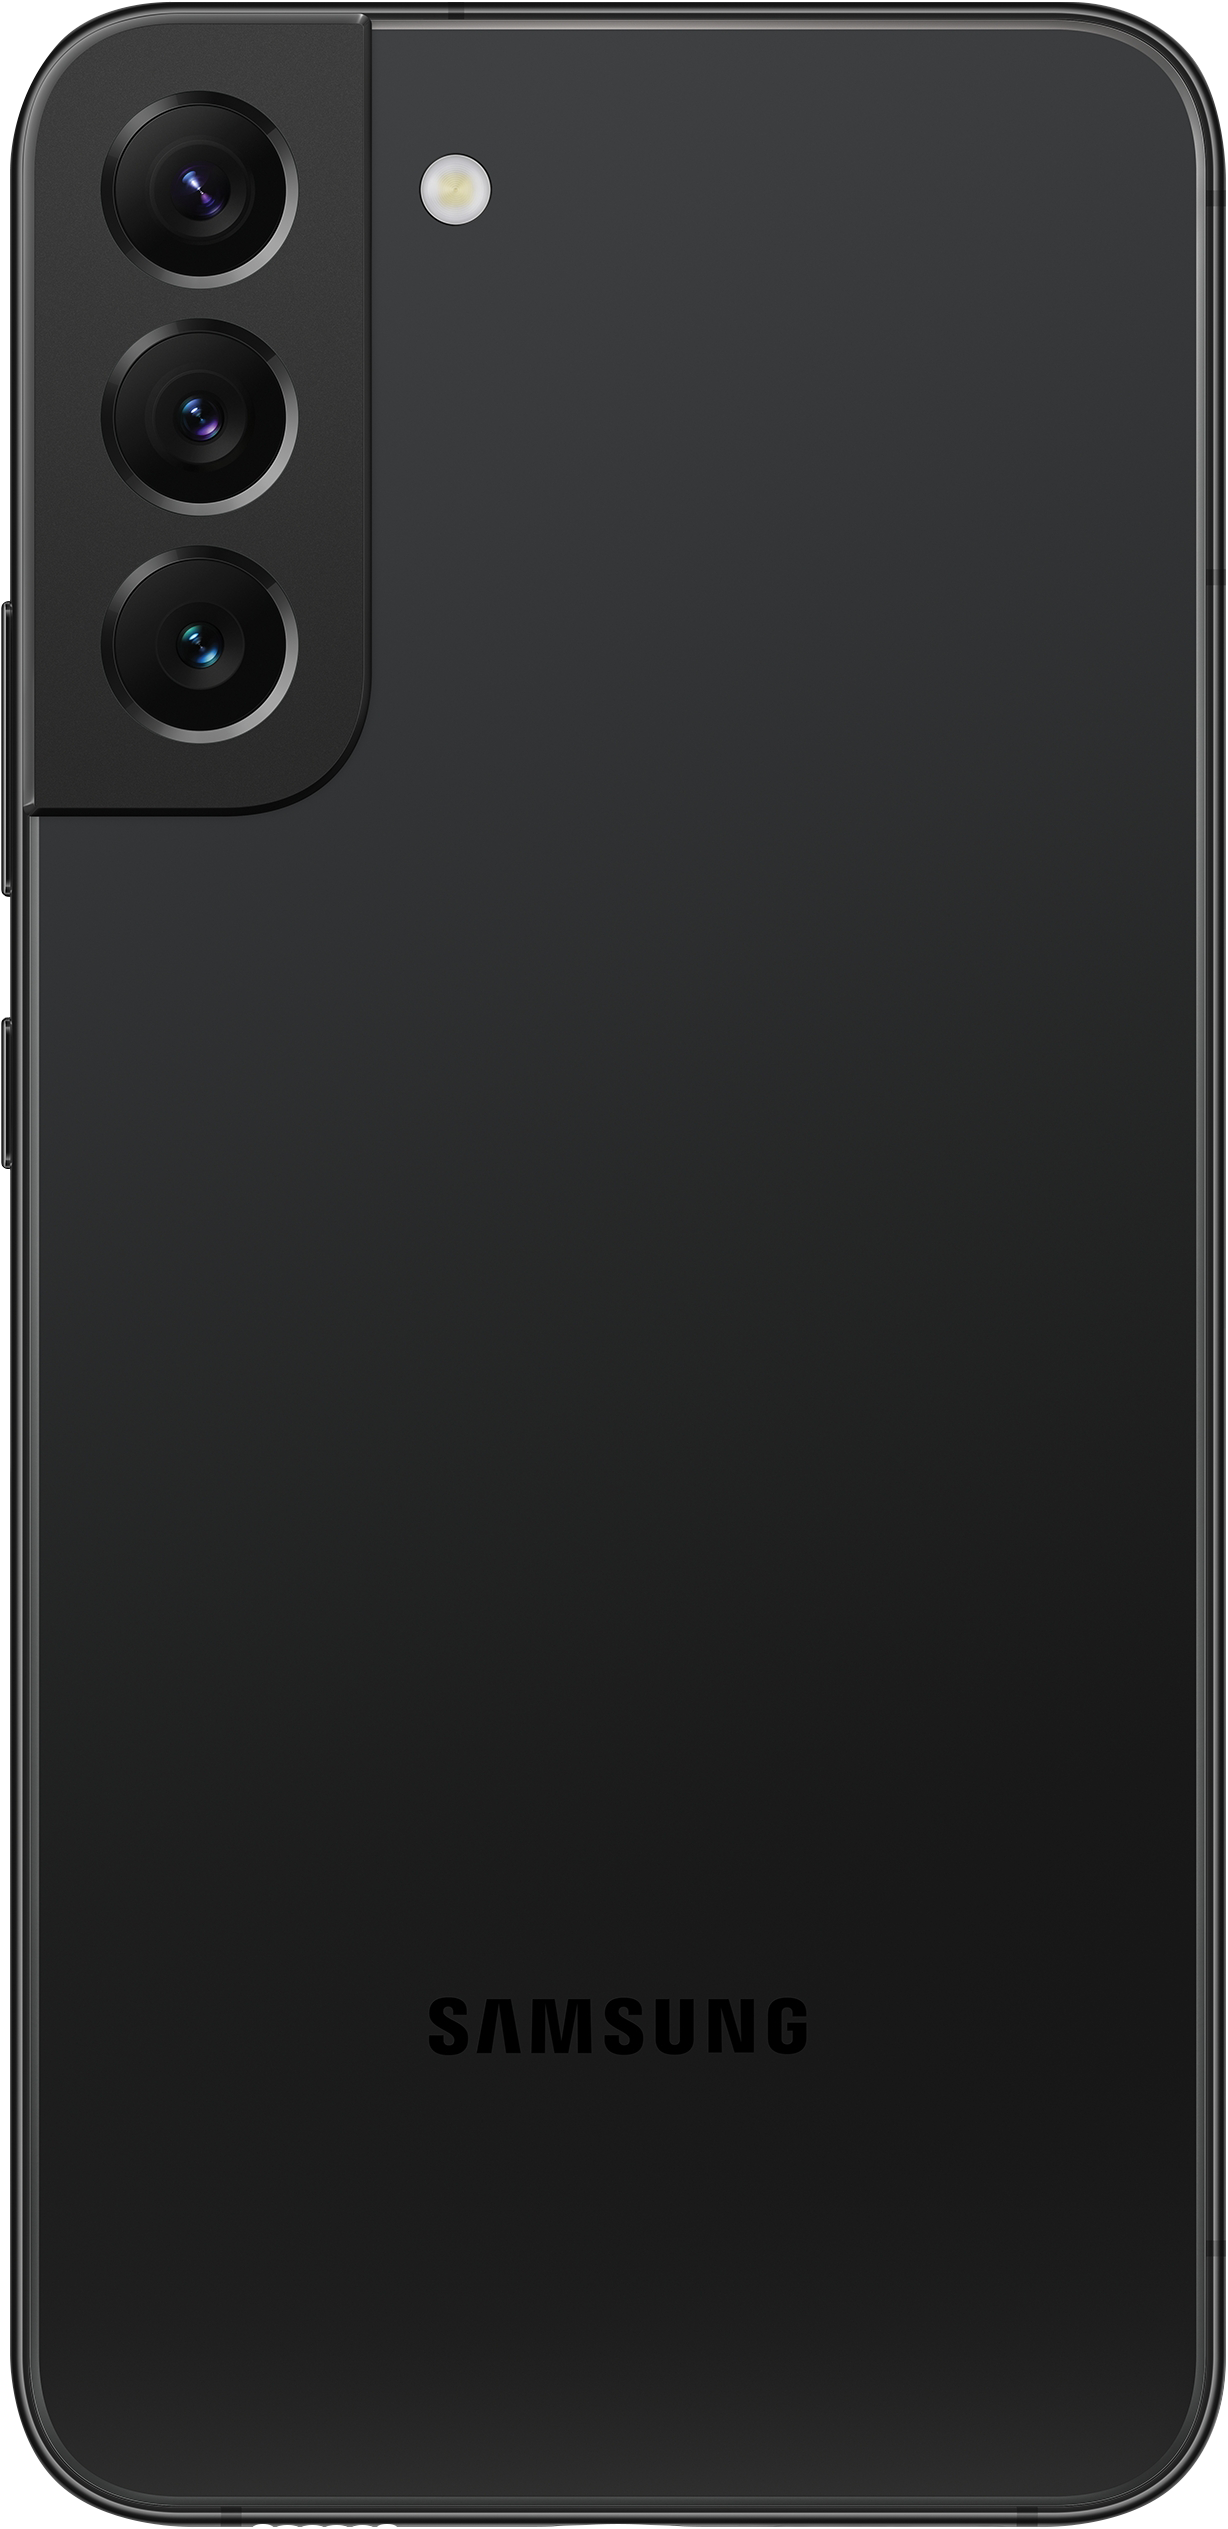 Rear view of S22 Plus phone